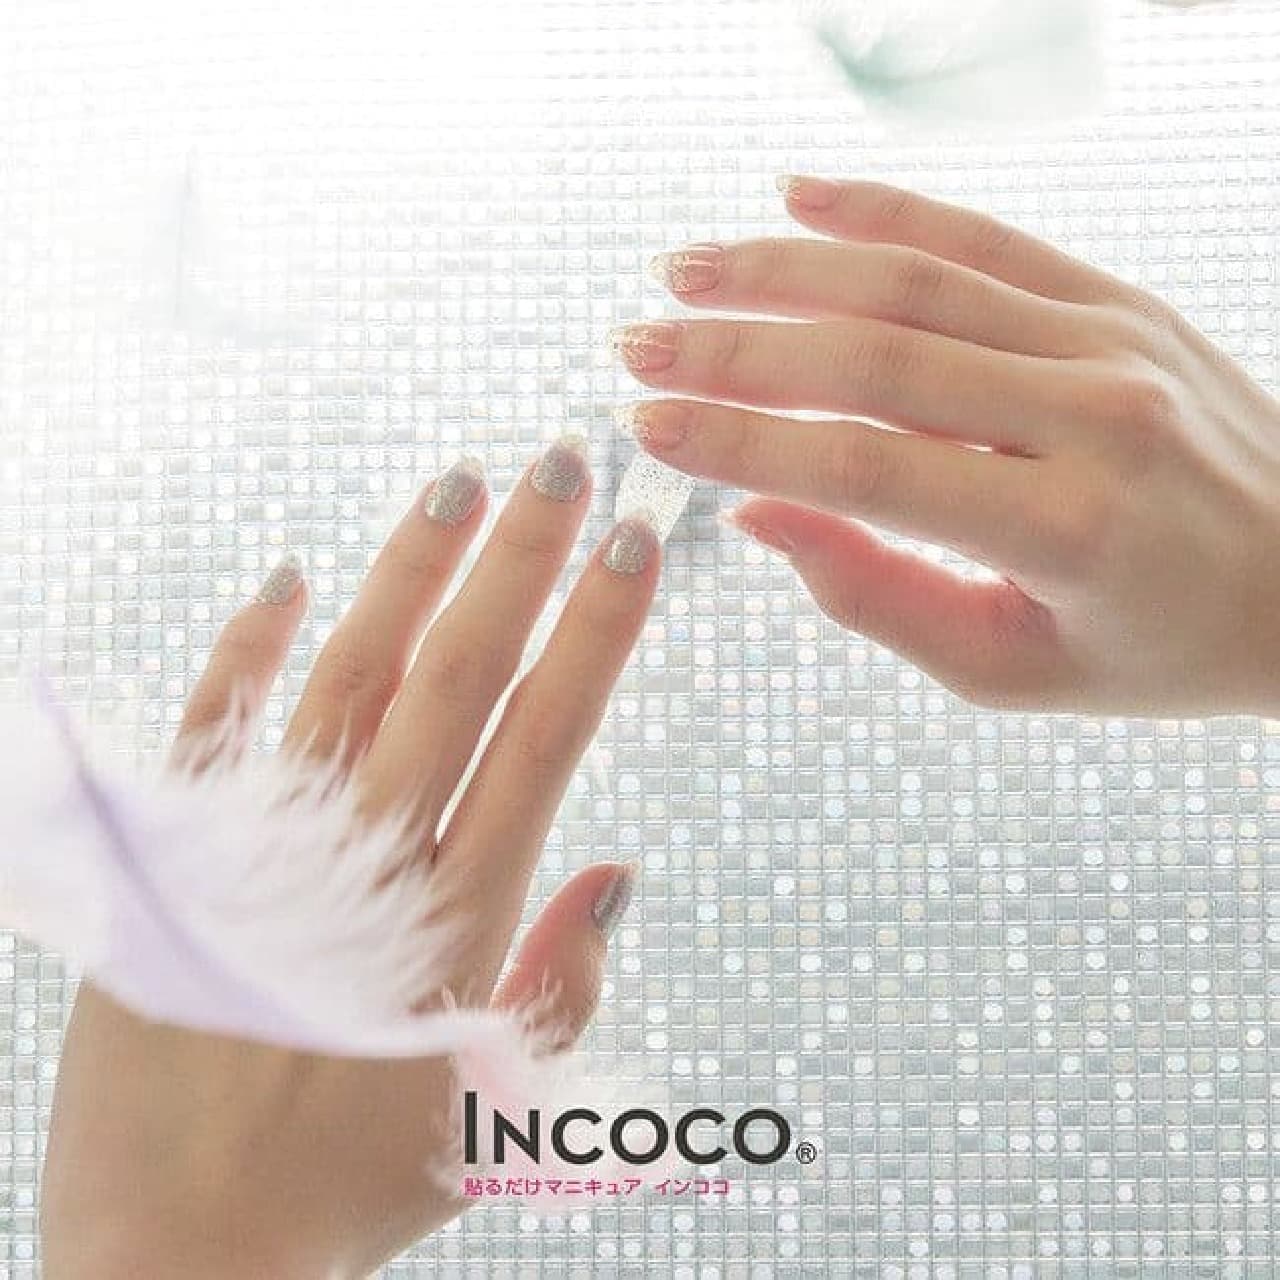 Incoco's 2021 Holiday Collection "Exciting Fantasy Nail"